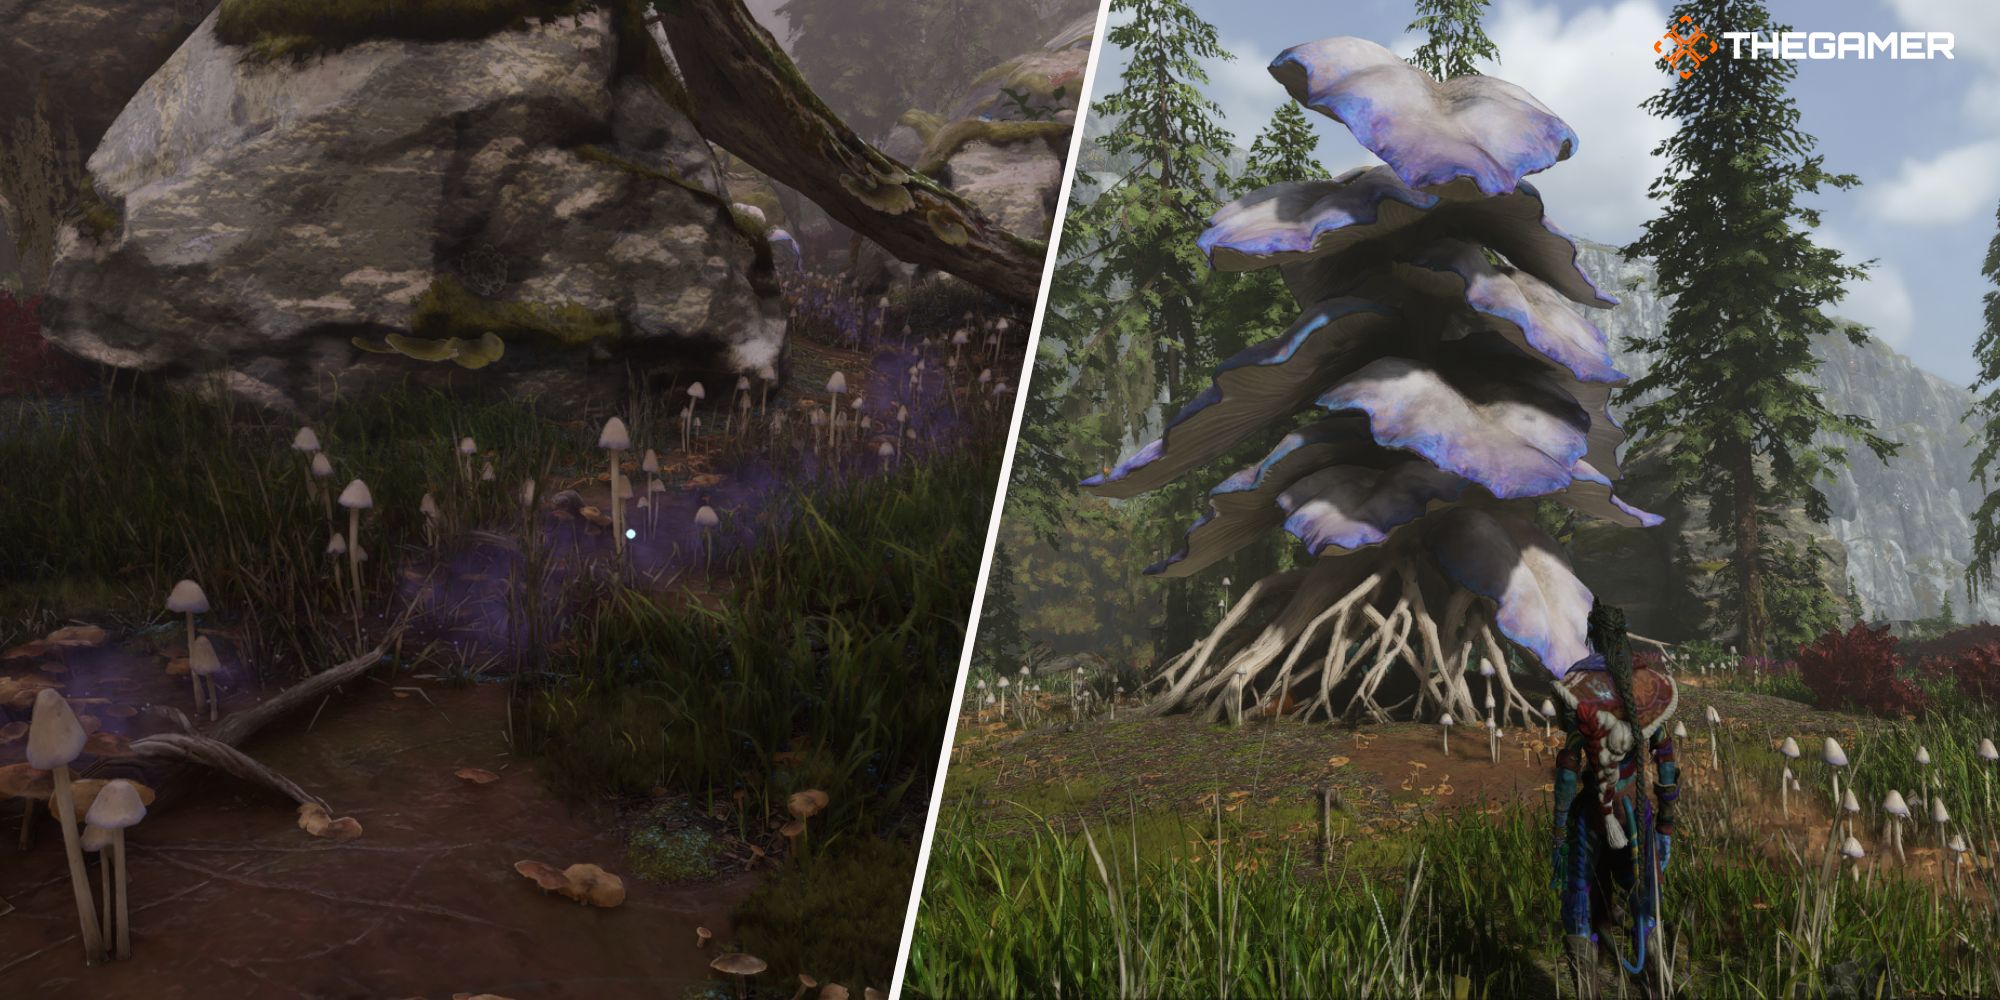 Right: Player standing next to a Budding Watcher - Left: A picture of a trail of small mushrooms Avatar Frontiers of Pandora